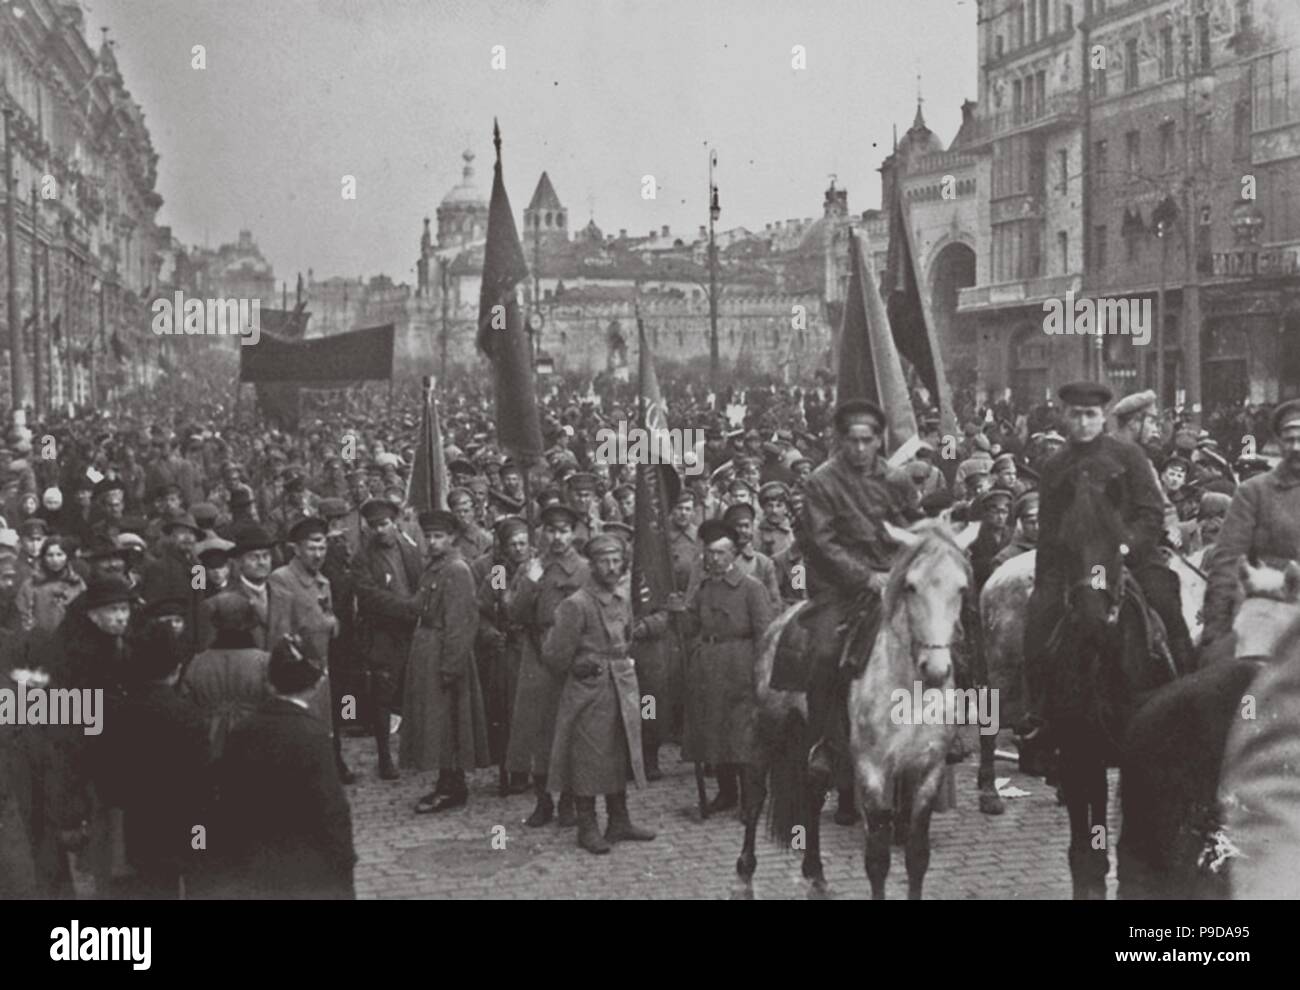 Demonstration in honor of the 1st anniversary of the Great October Socialist Revolution in front of the hotel Metropol in Moscow. Museum: Russian State Film and Photo Archive, Krasnogorsk. Stock Photo